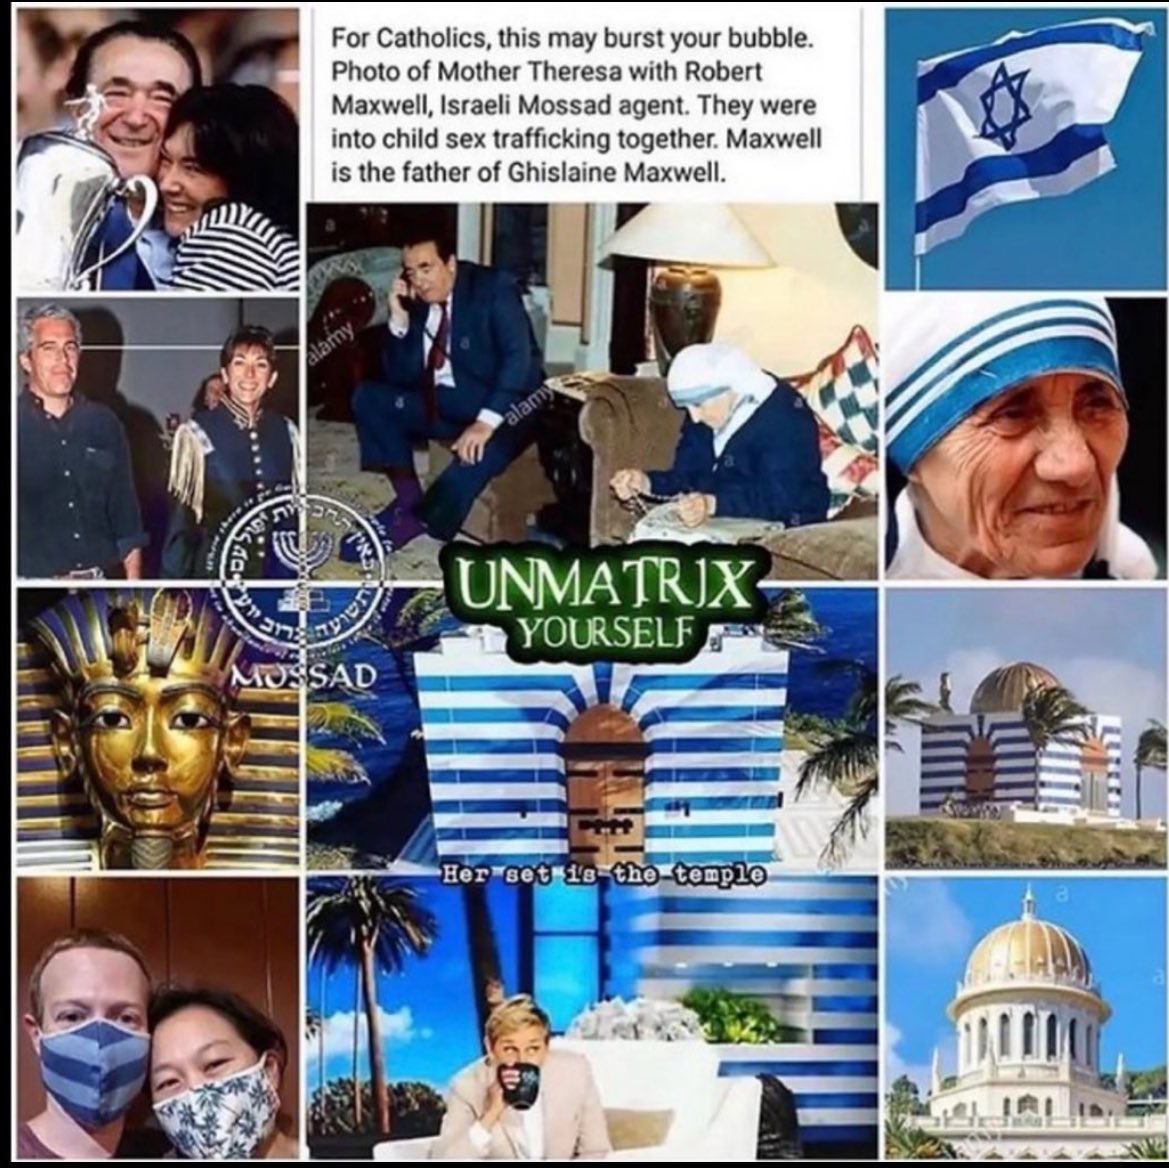 For Catholics, this may burst your bubble. Photo of Father Teresa with Robert Maxwell Mossad agent. They were into child sex trafficking together. 
Robert Maxwell was the father of Ghislaine Maxwell. 
#SaveTheChildrenWorldWide 🫶🏾🫶🏽🫶🏼